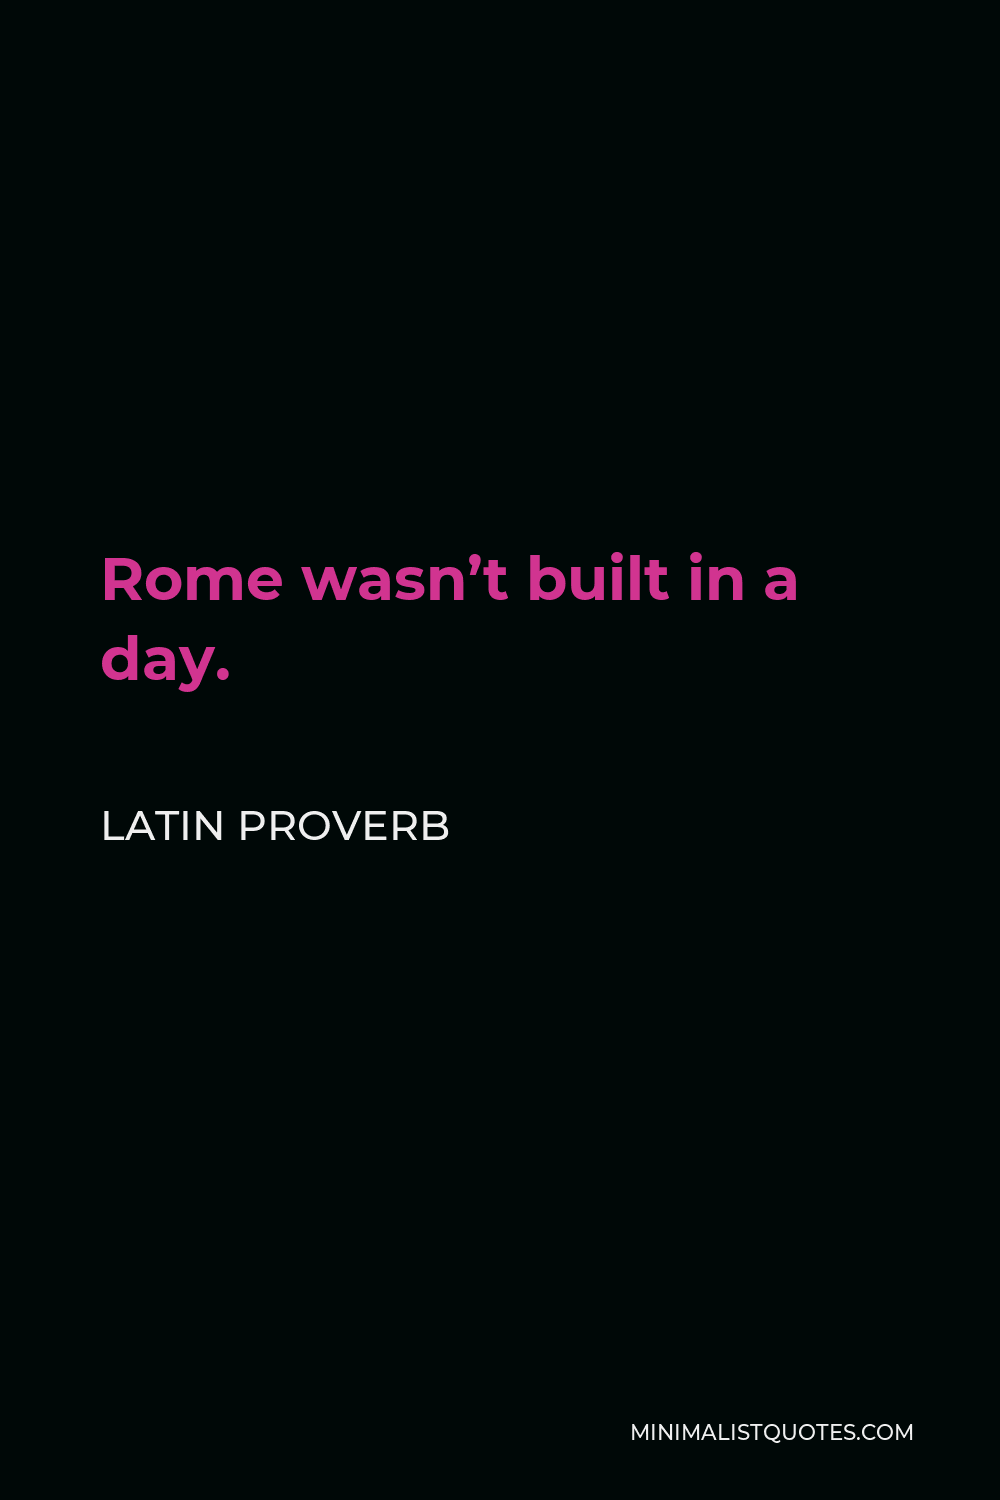 Latin Proverb Quote - Rome wasn’t built in a day.